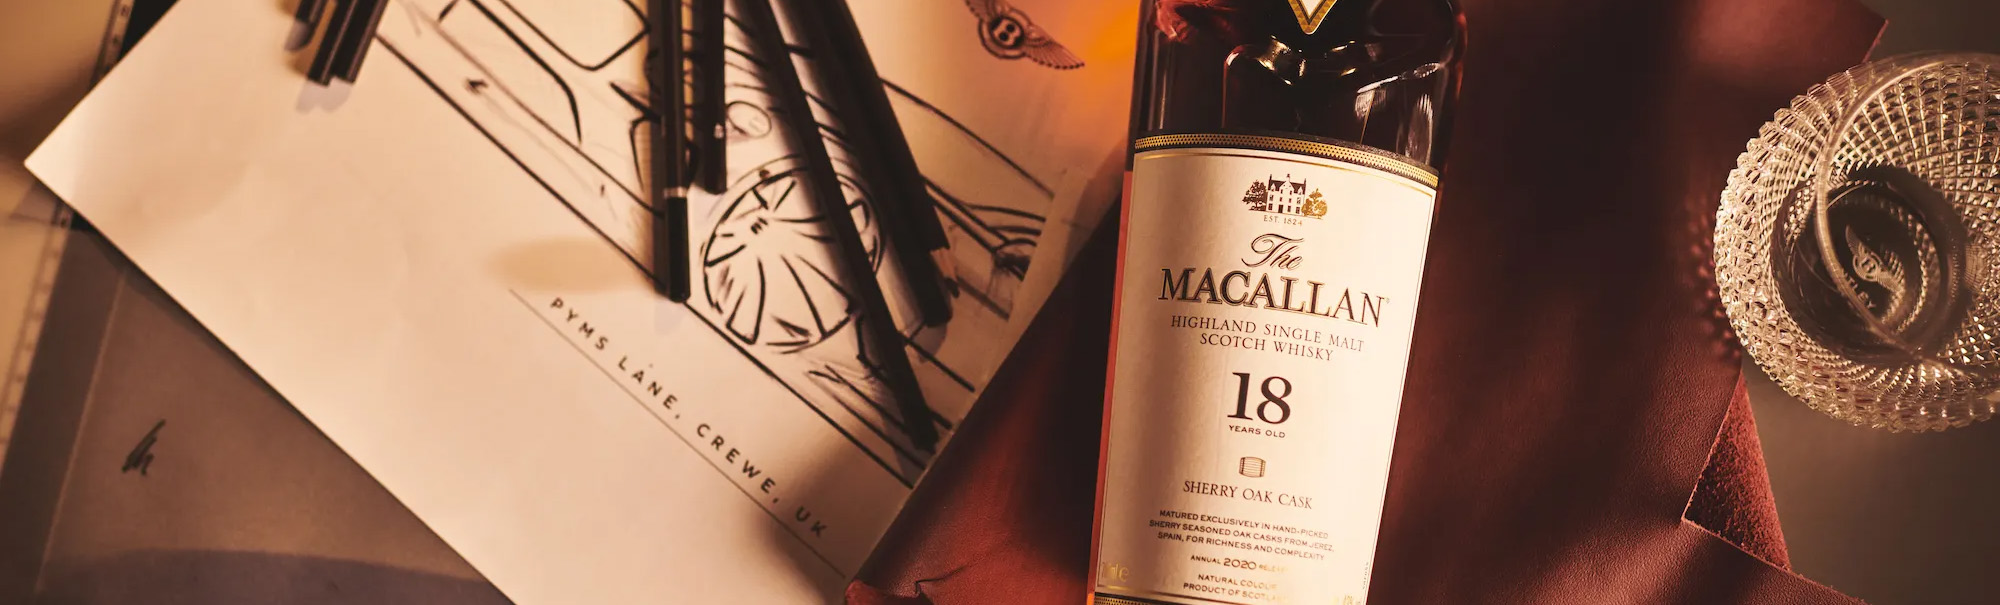 The-Macallan The Bottle Club